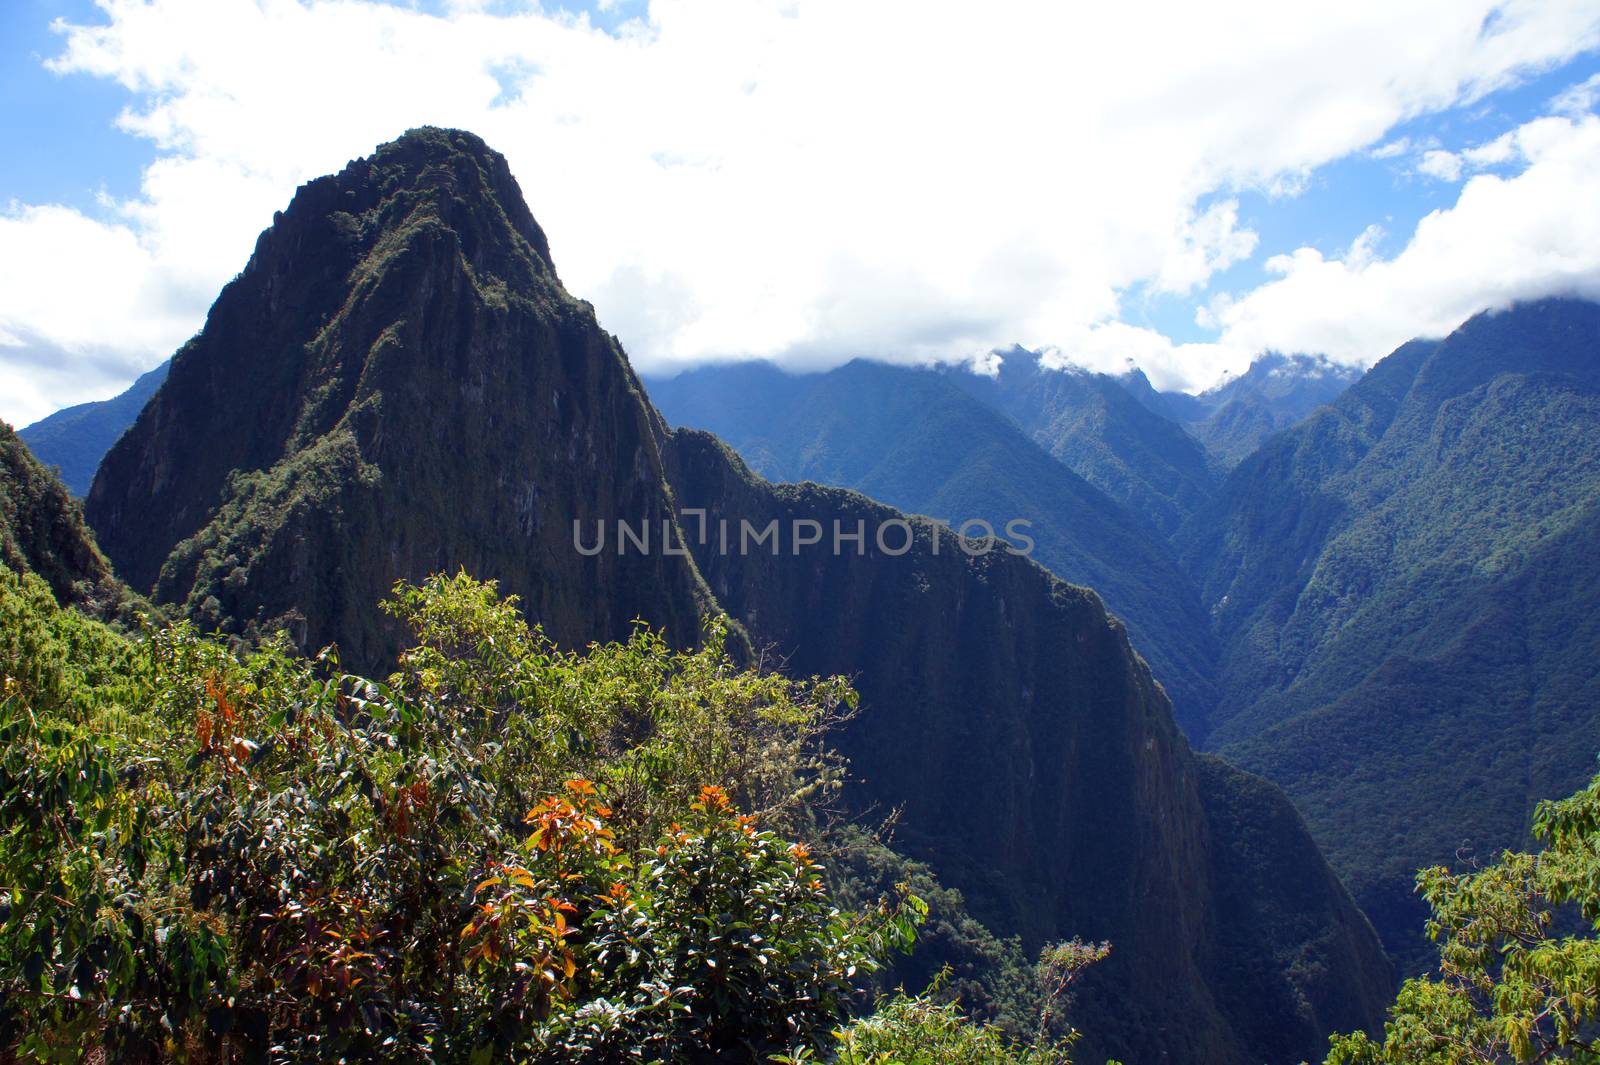 Machu Picchu, site of the ruins of the Incan citadel high in the Andes Mountains in Peru